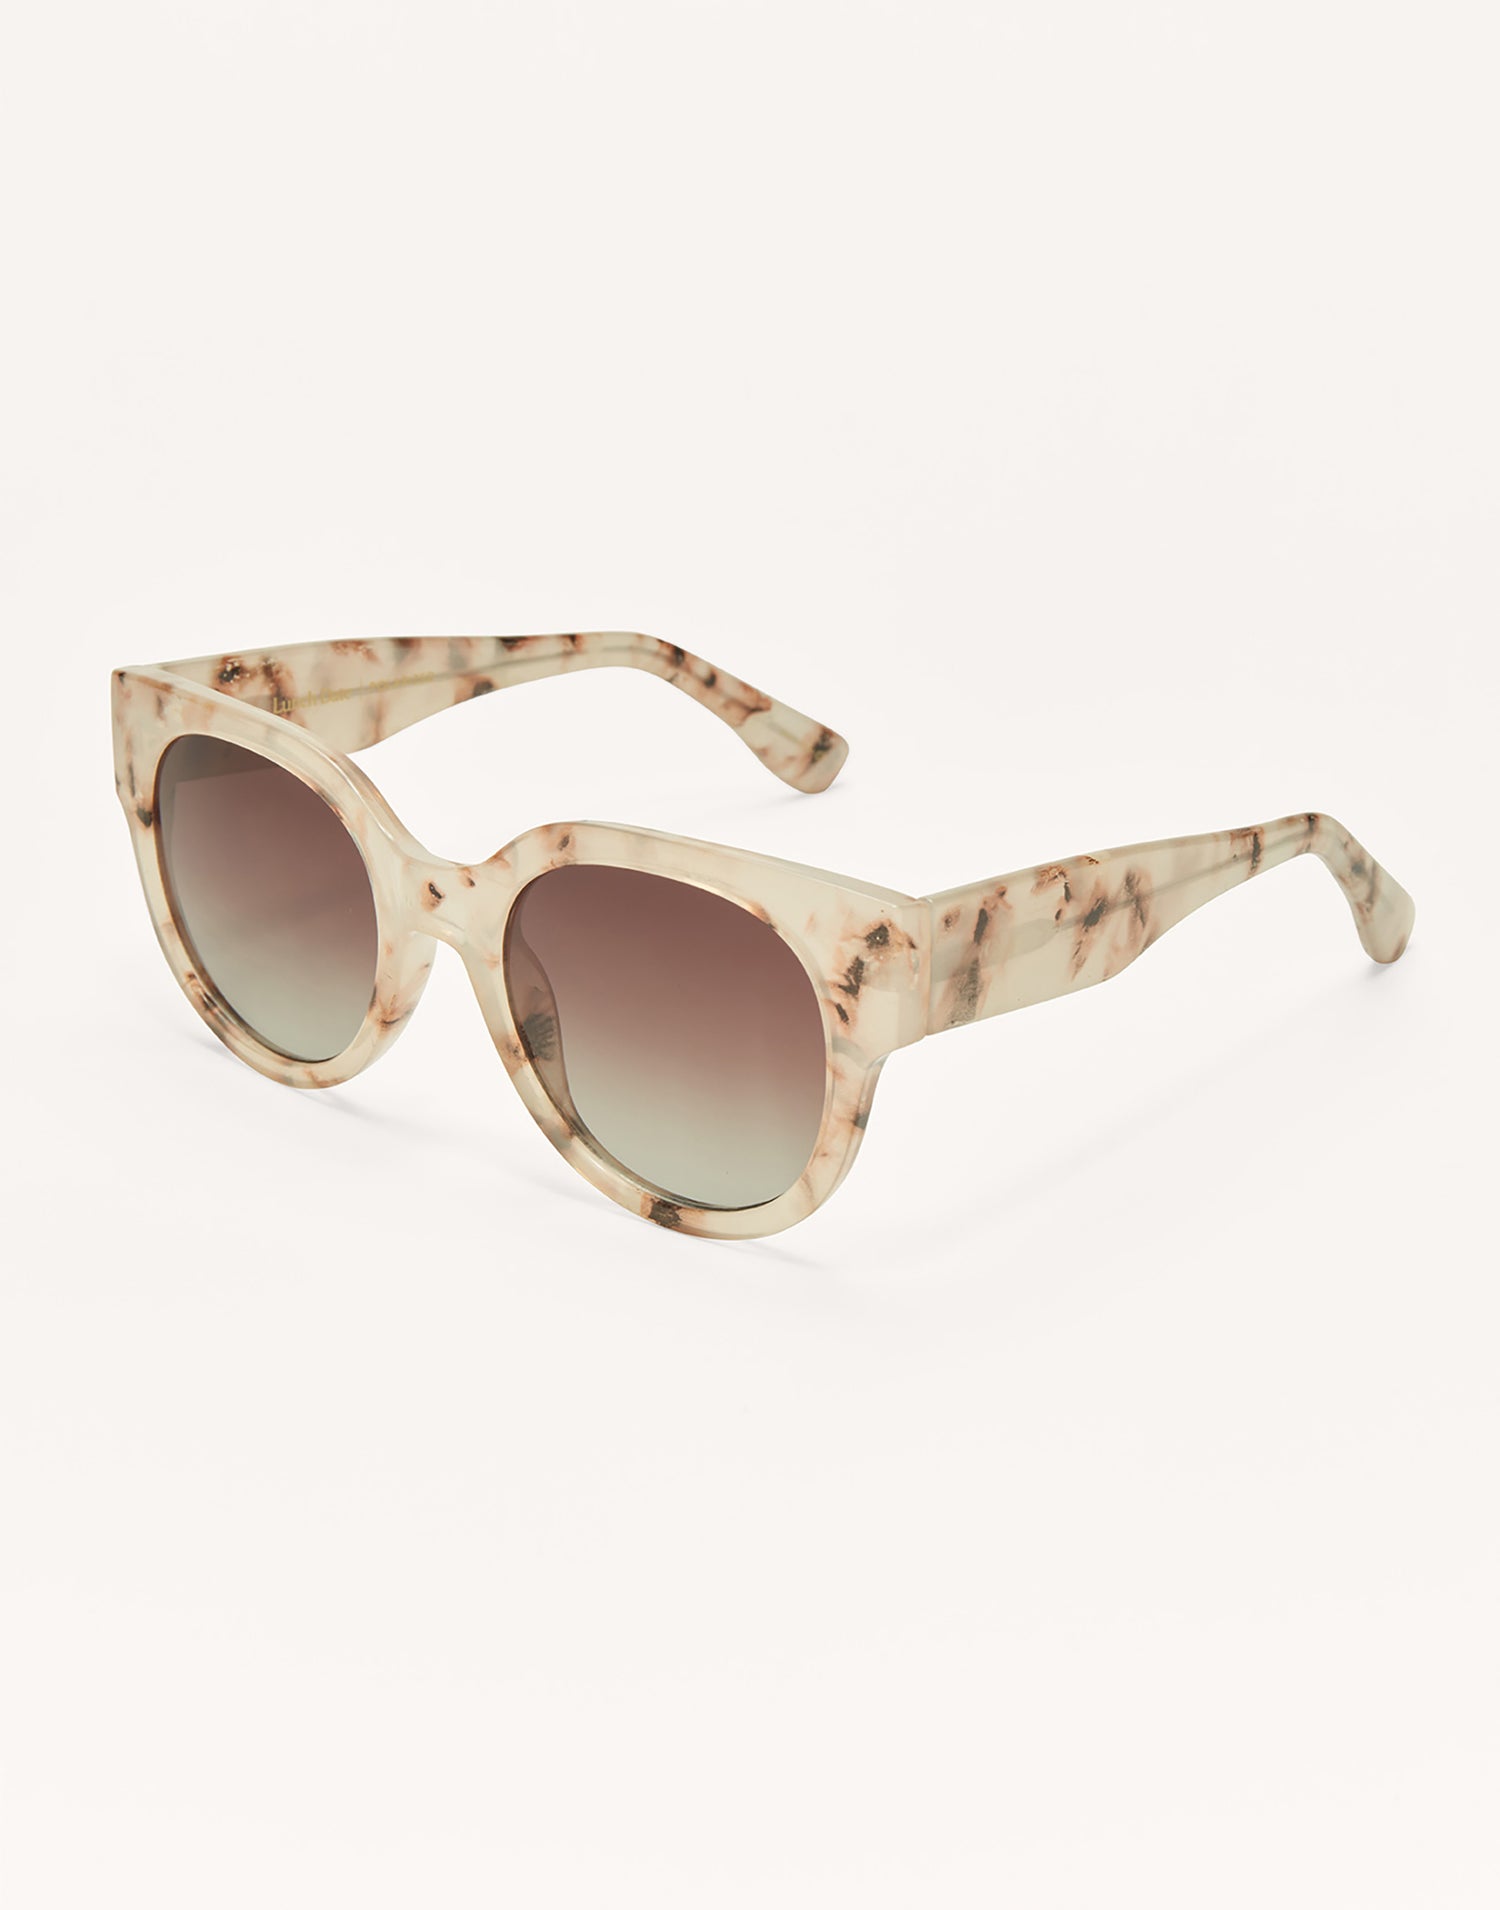 Lunch Date Sunglasses by Z Supply in Warm Sands - Angled View